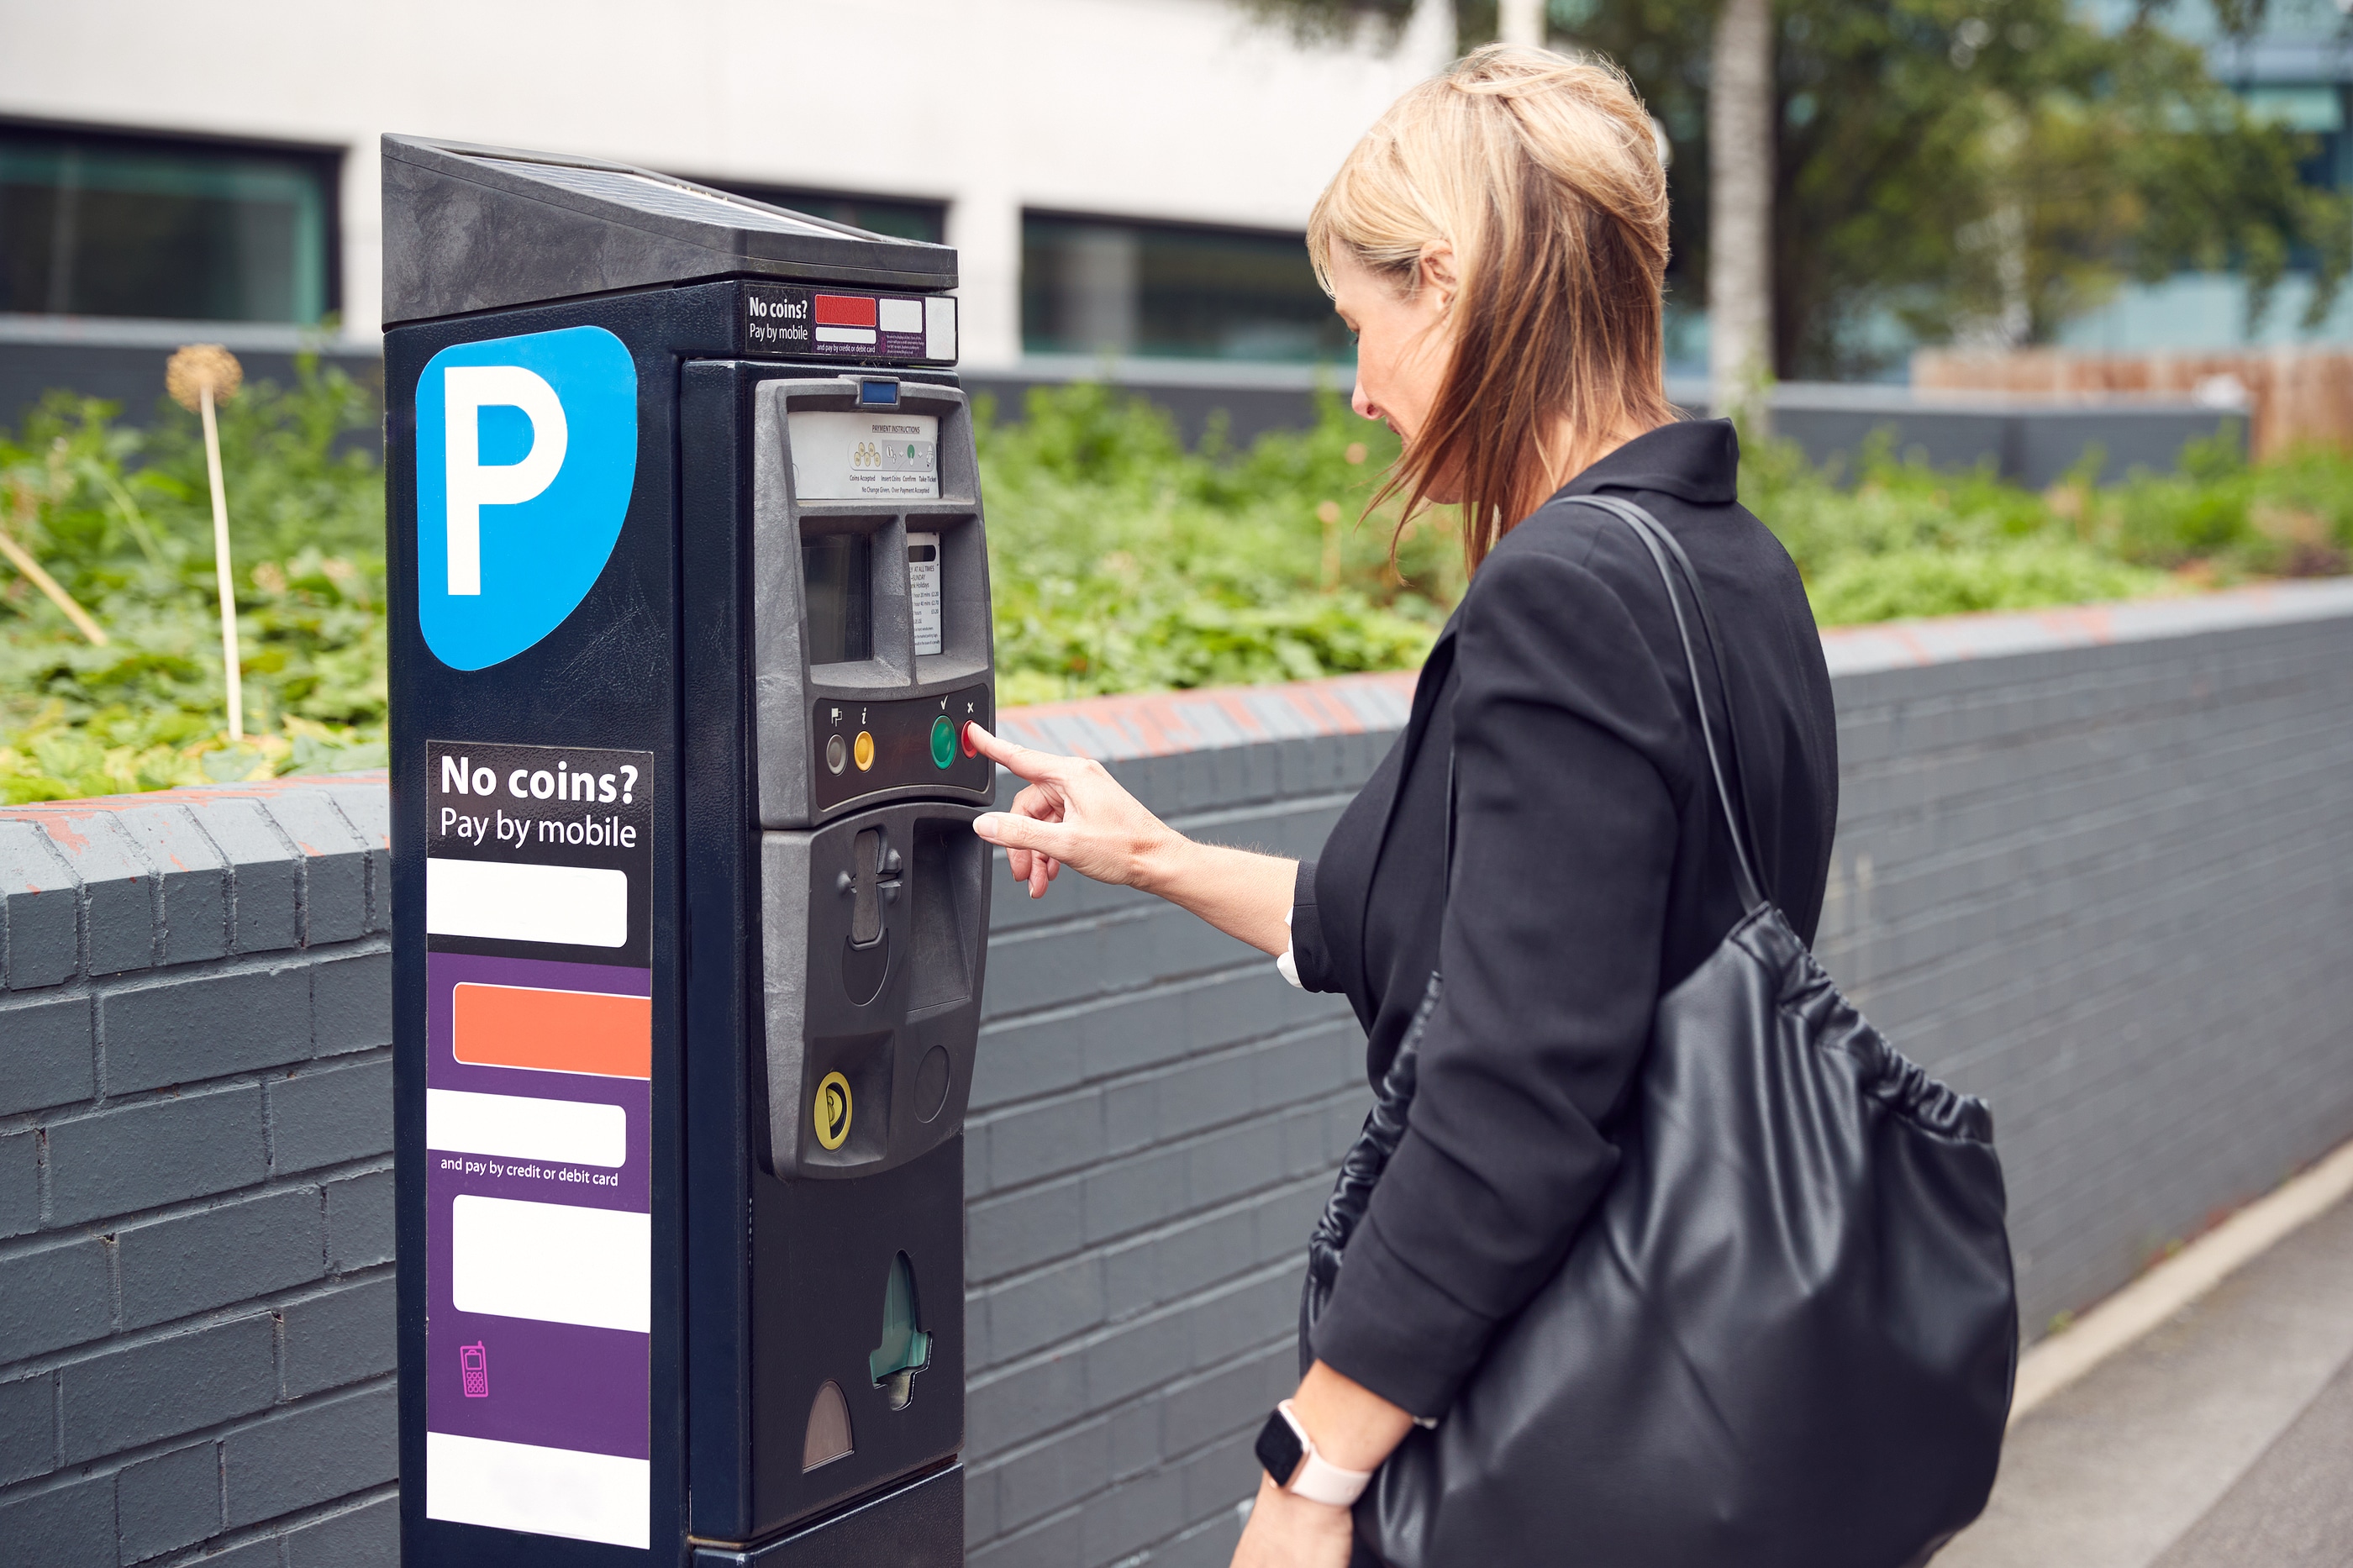 3 Tips to Save Cash on Parking